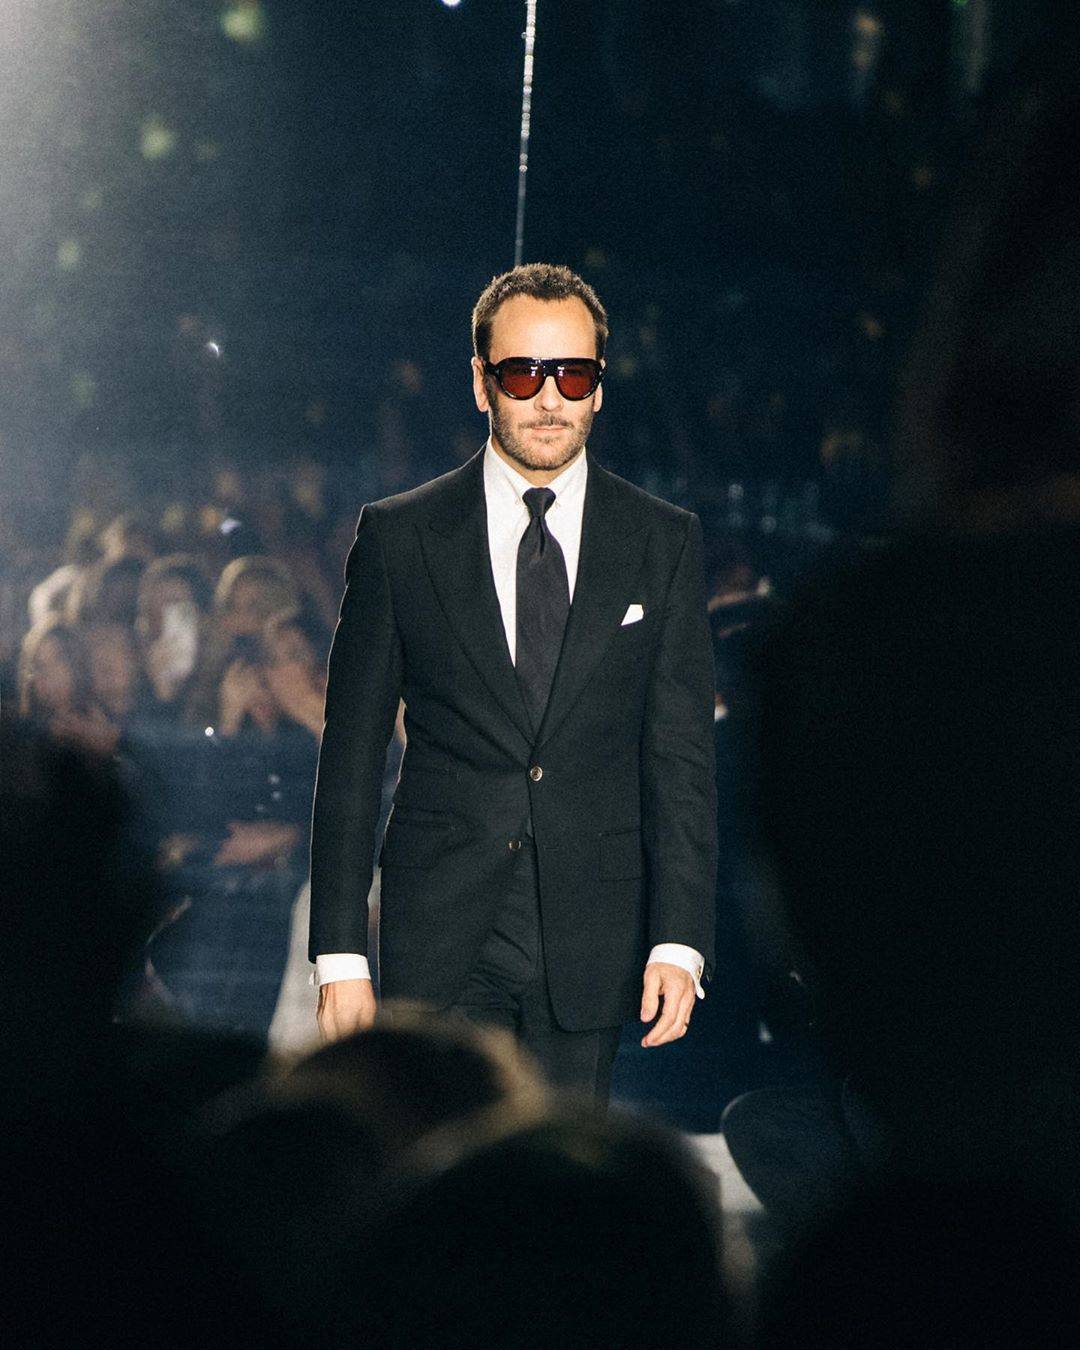 Thomas Carlyle Ford, the man behind Tom Ford's success and Gucci in early 2000s